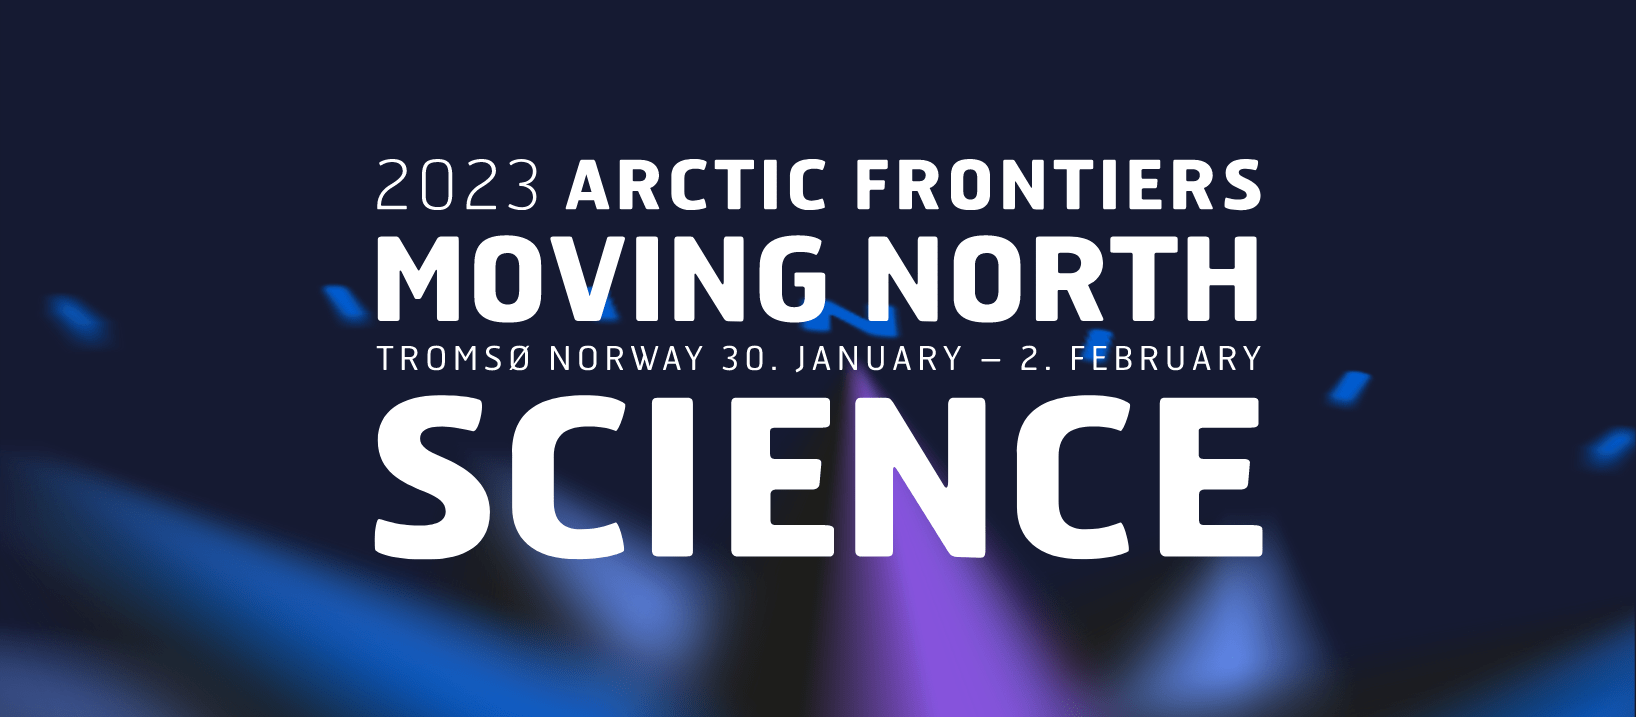 Arctic Frontiers 2023 Moving North